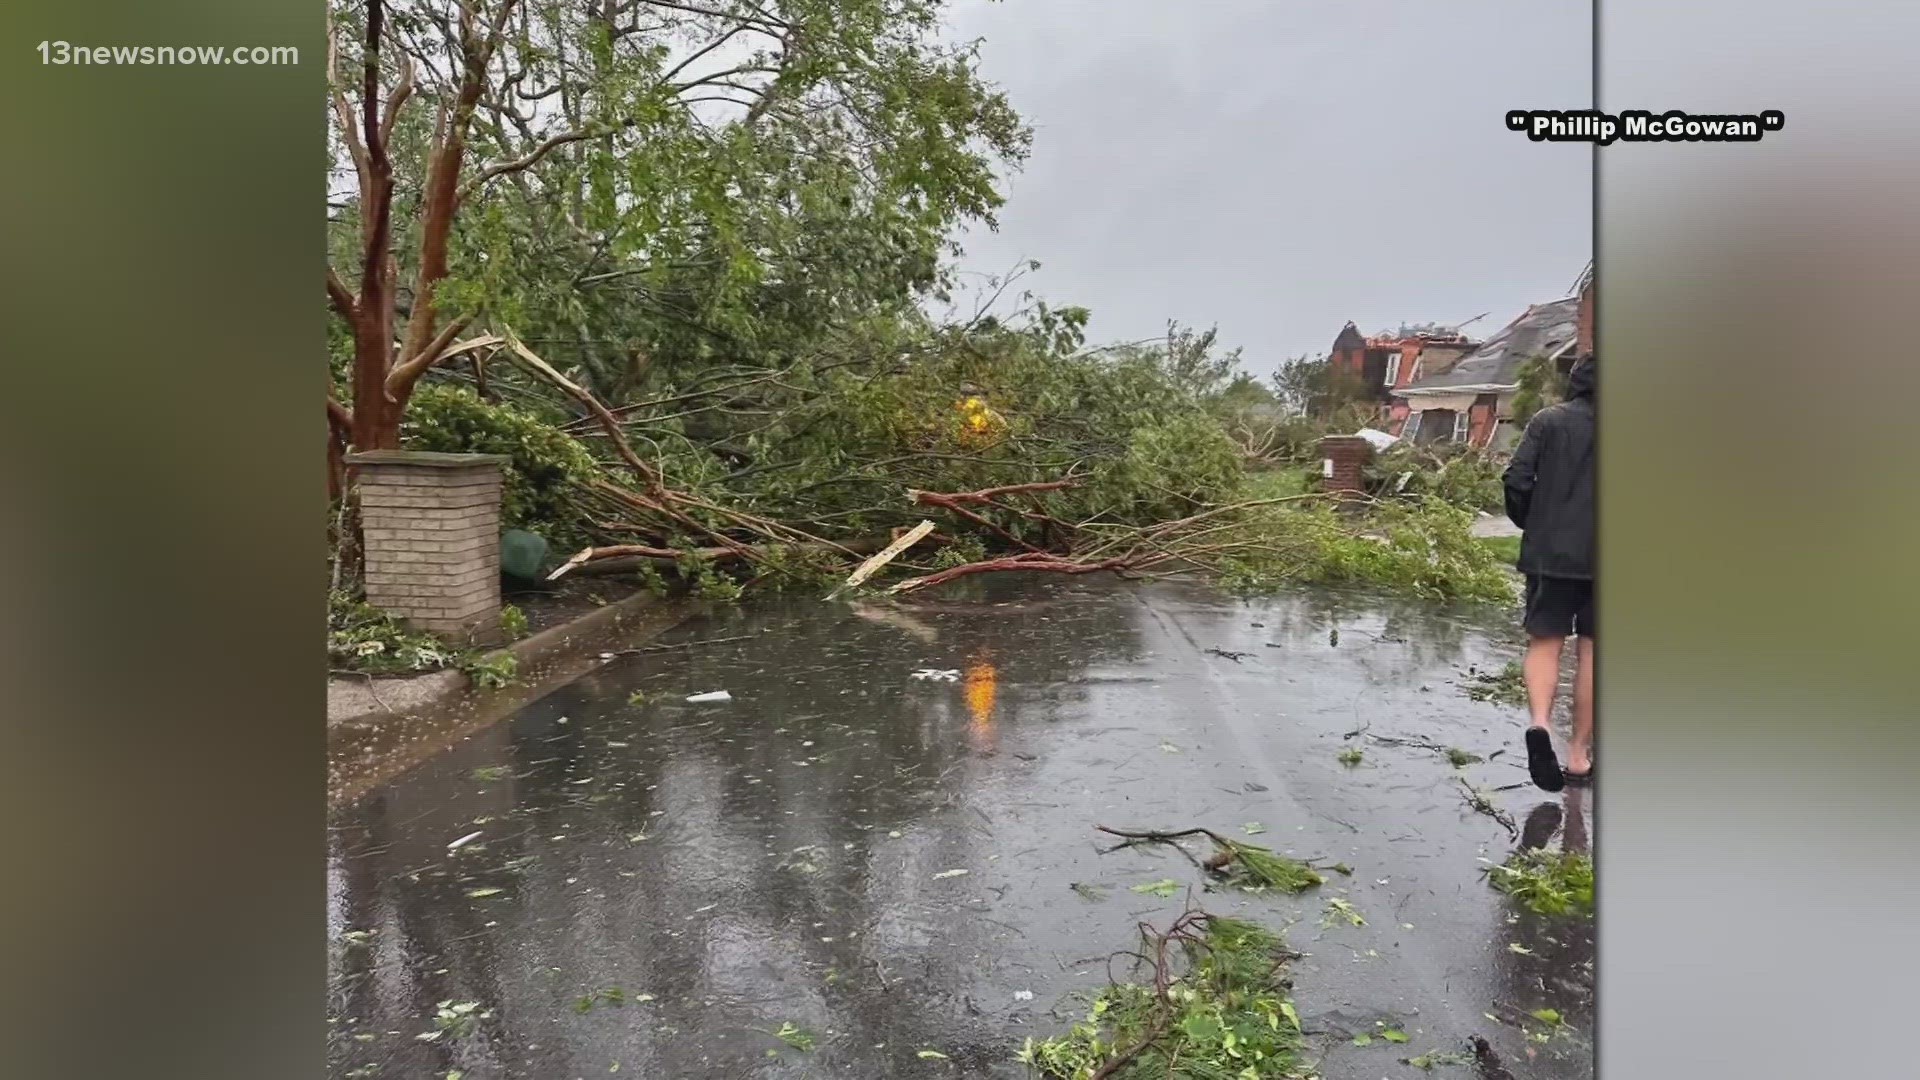 A local state of emergency has been declared after a confirmed tornado ripped through the Great Neck area of Virginia Beach Sunday night.